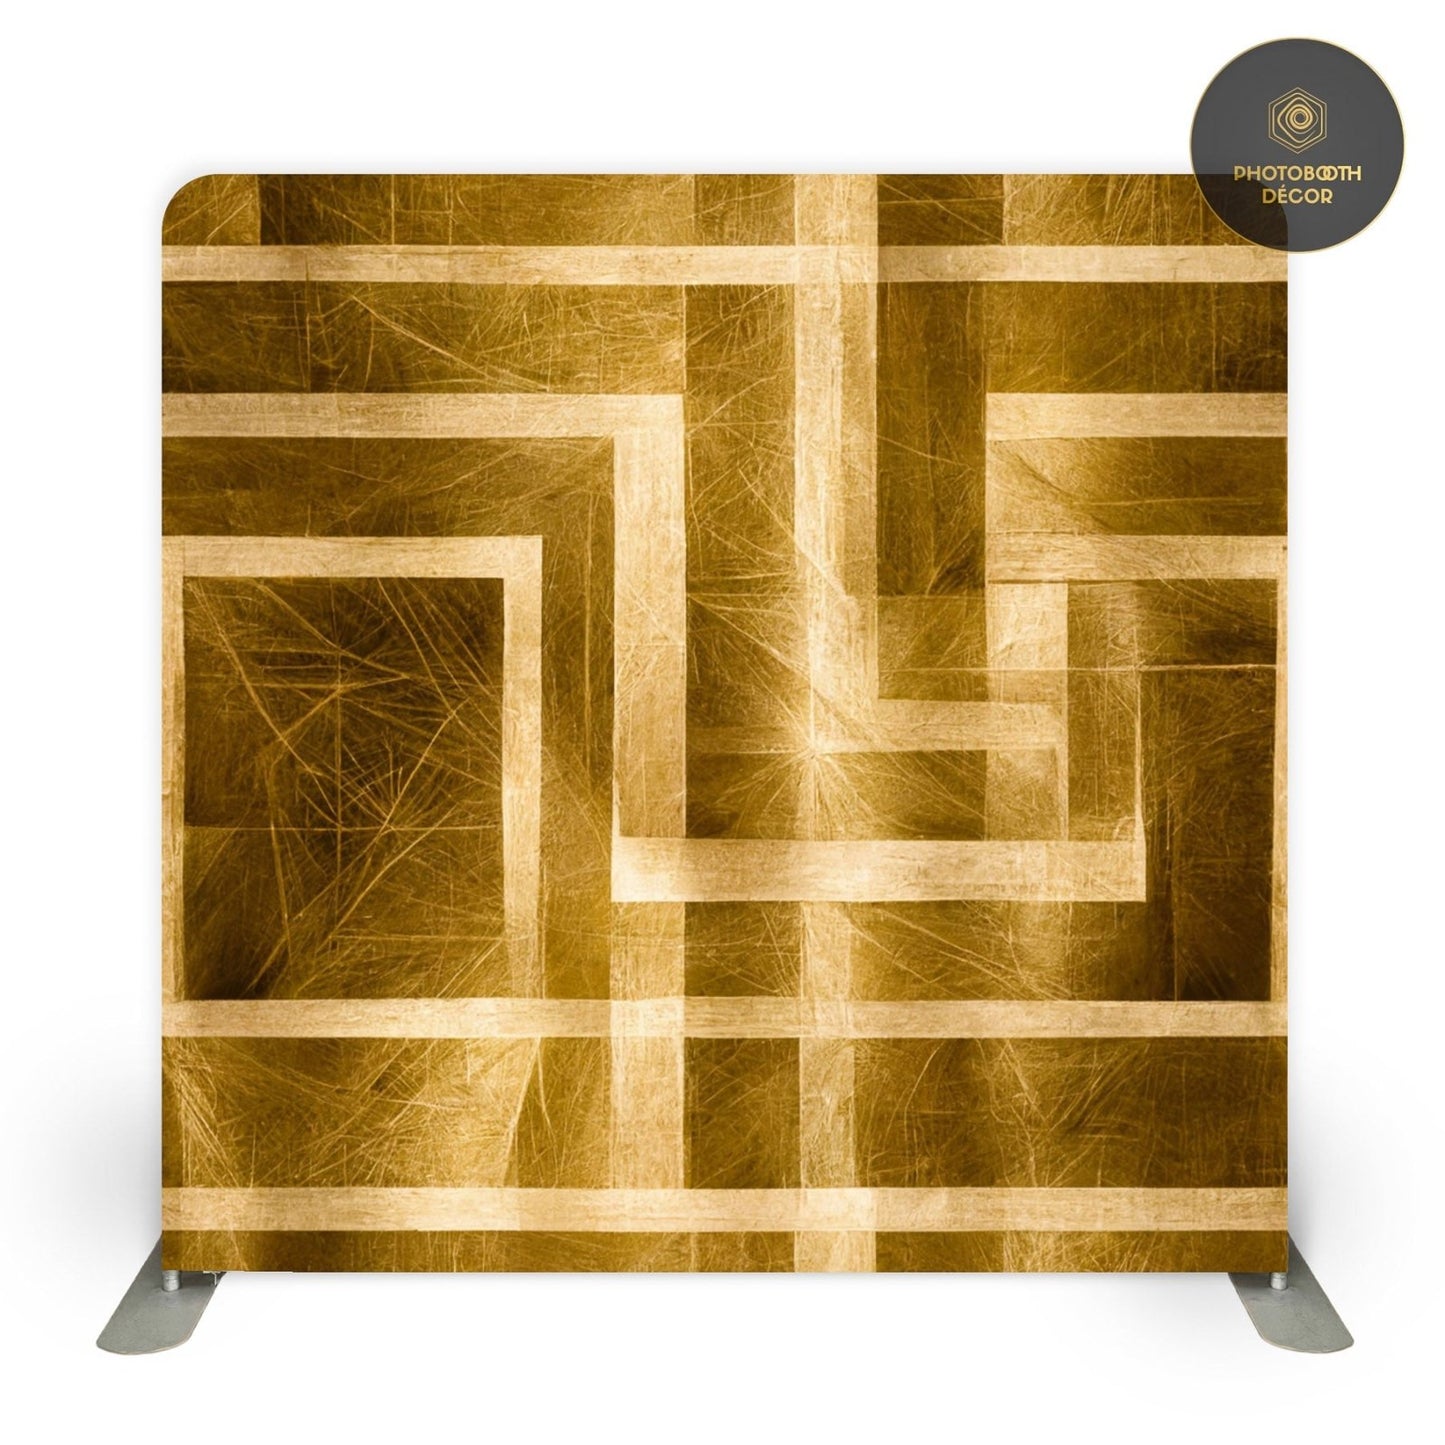 Gold - Golden Enigma - Zoomed - Photobooth Décor